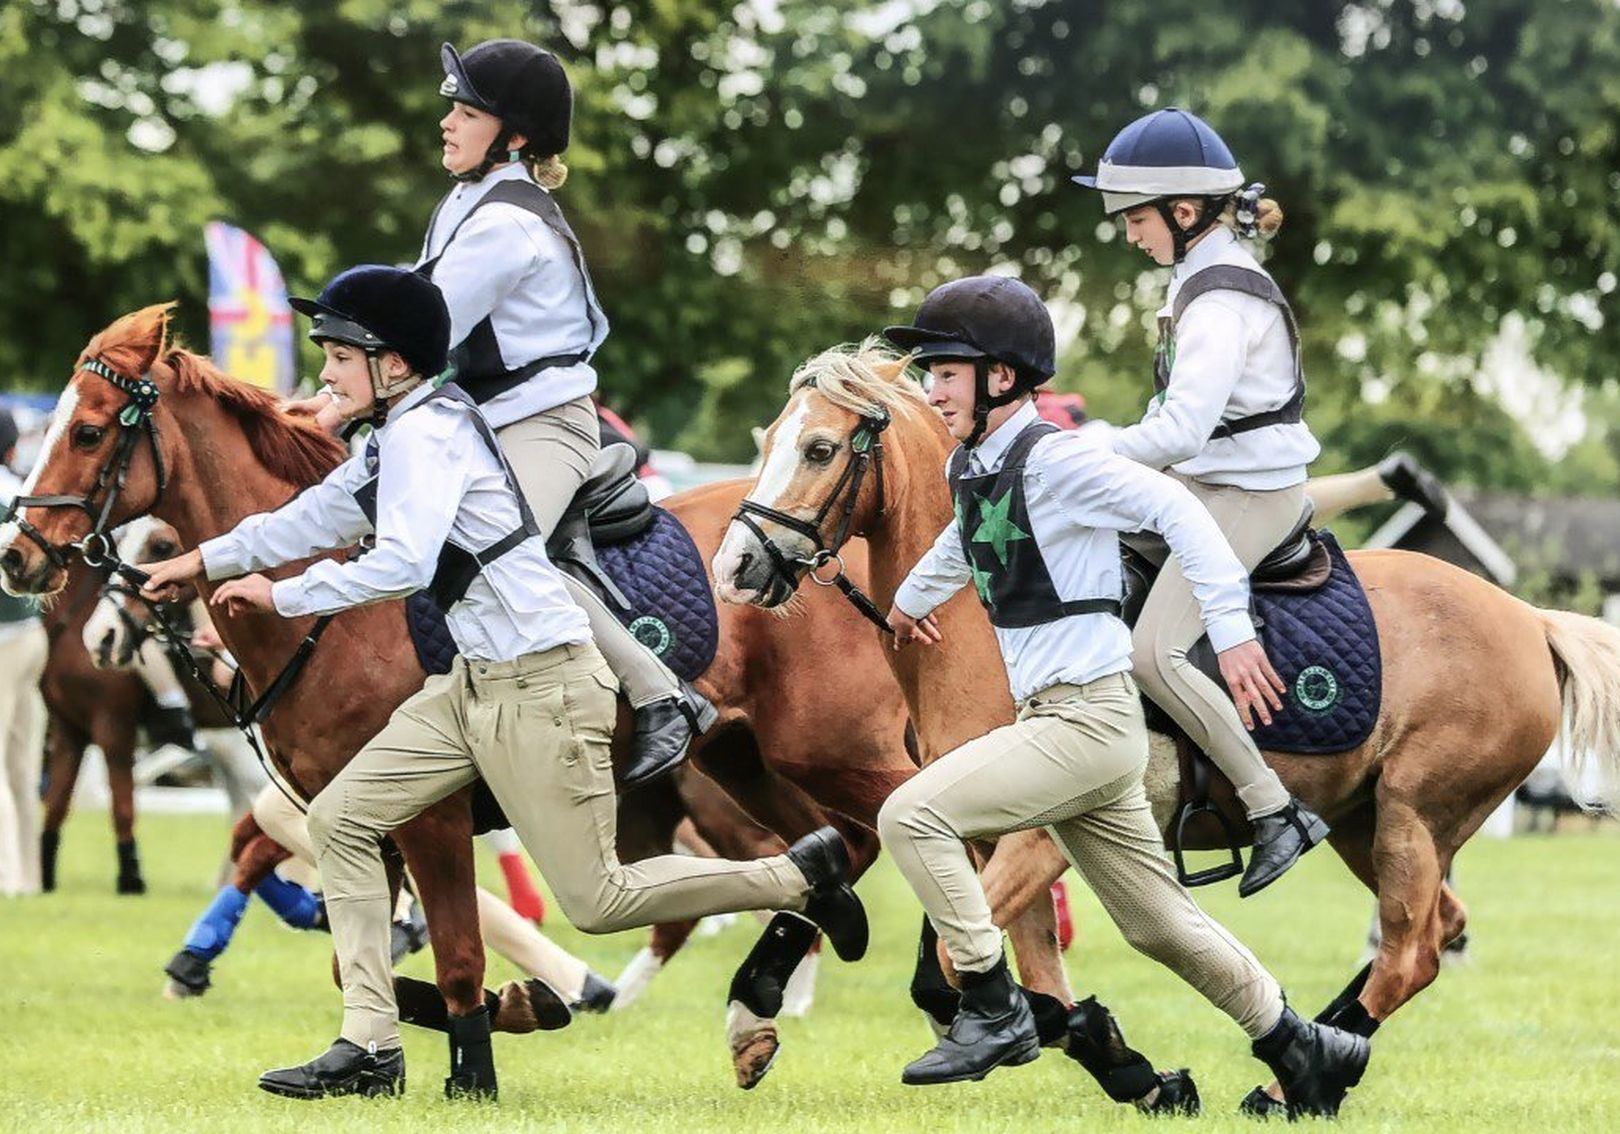 North Herefordshire Pony Club HOYS Mounted Games Team